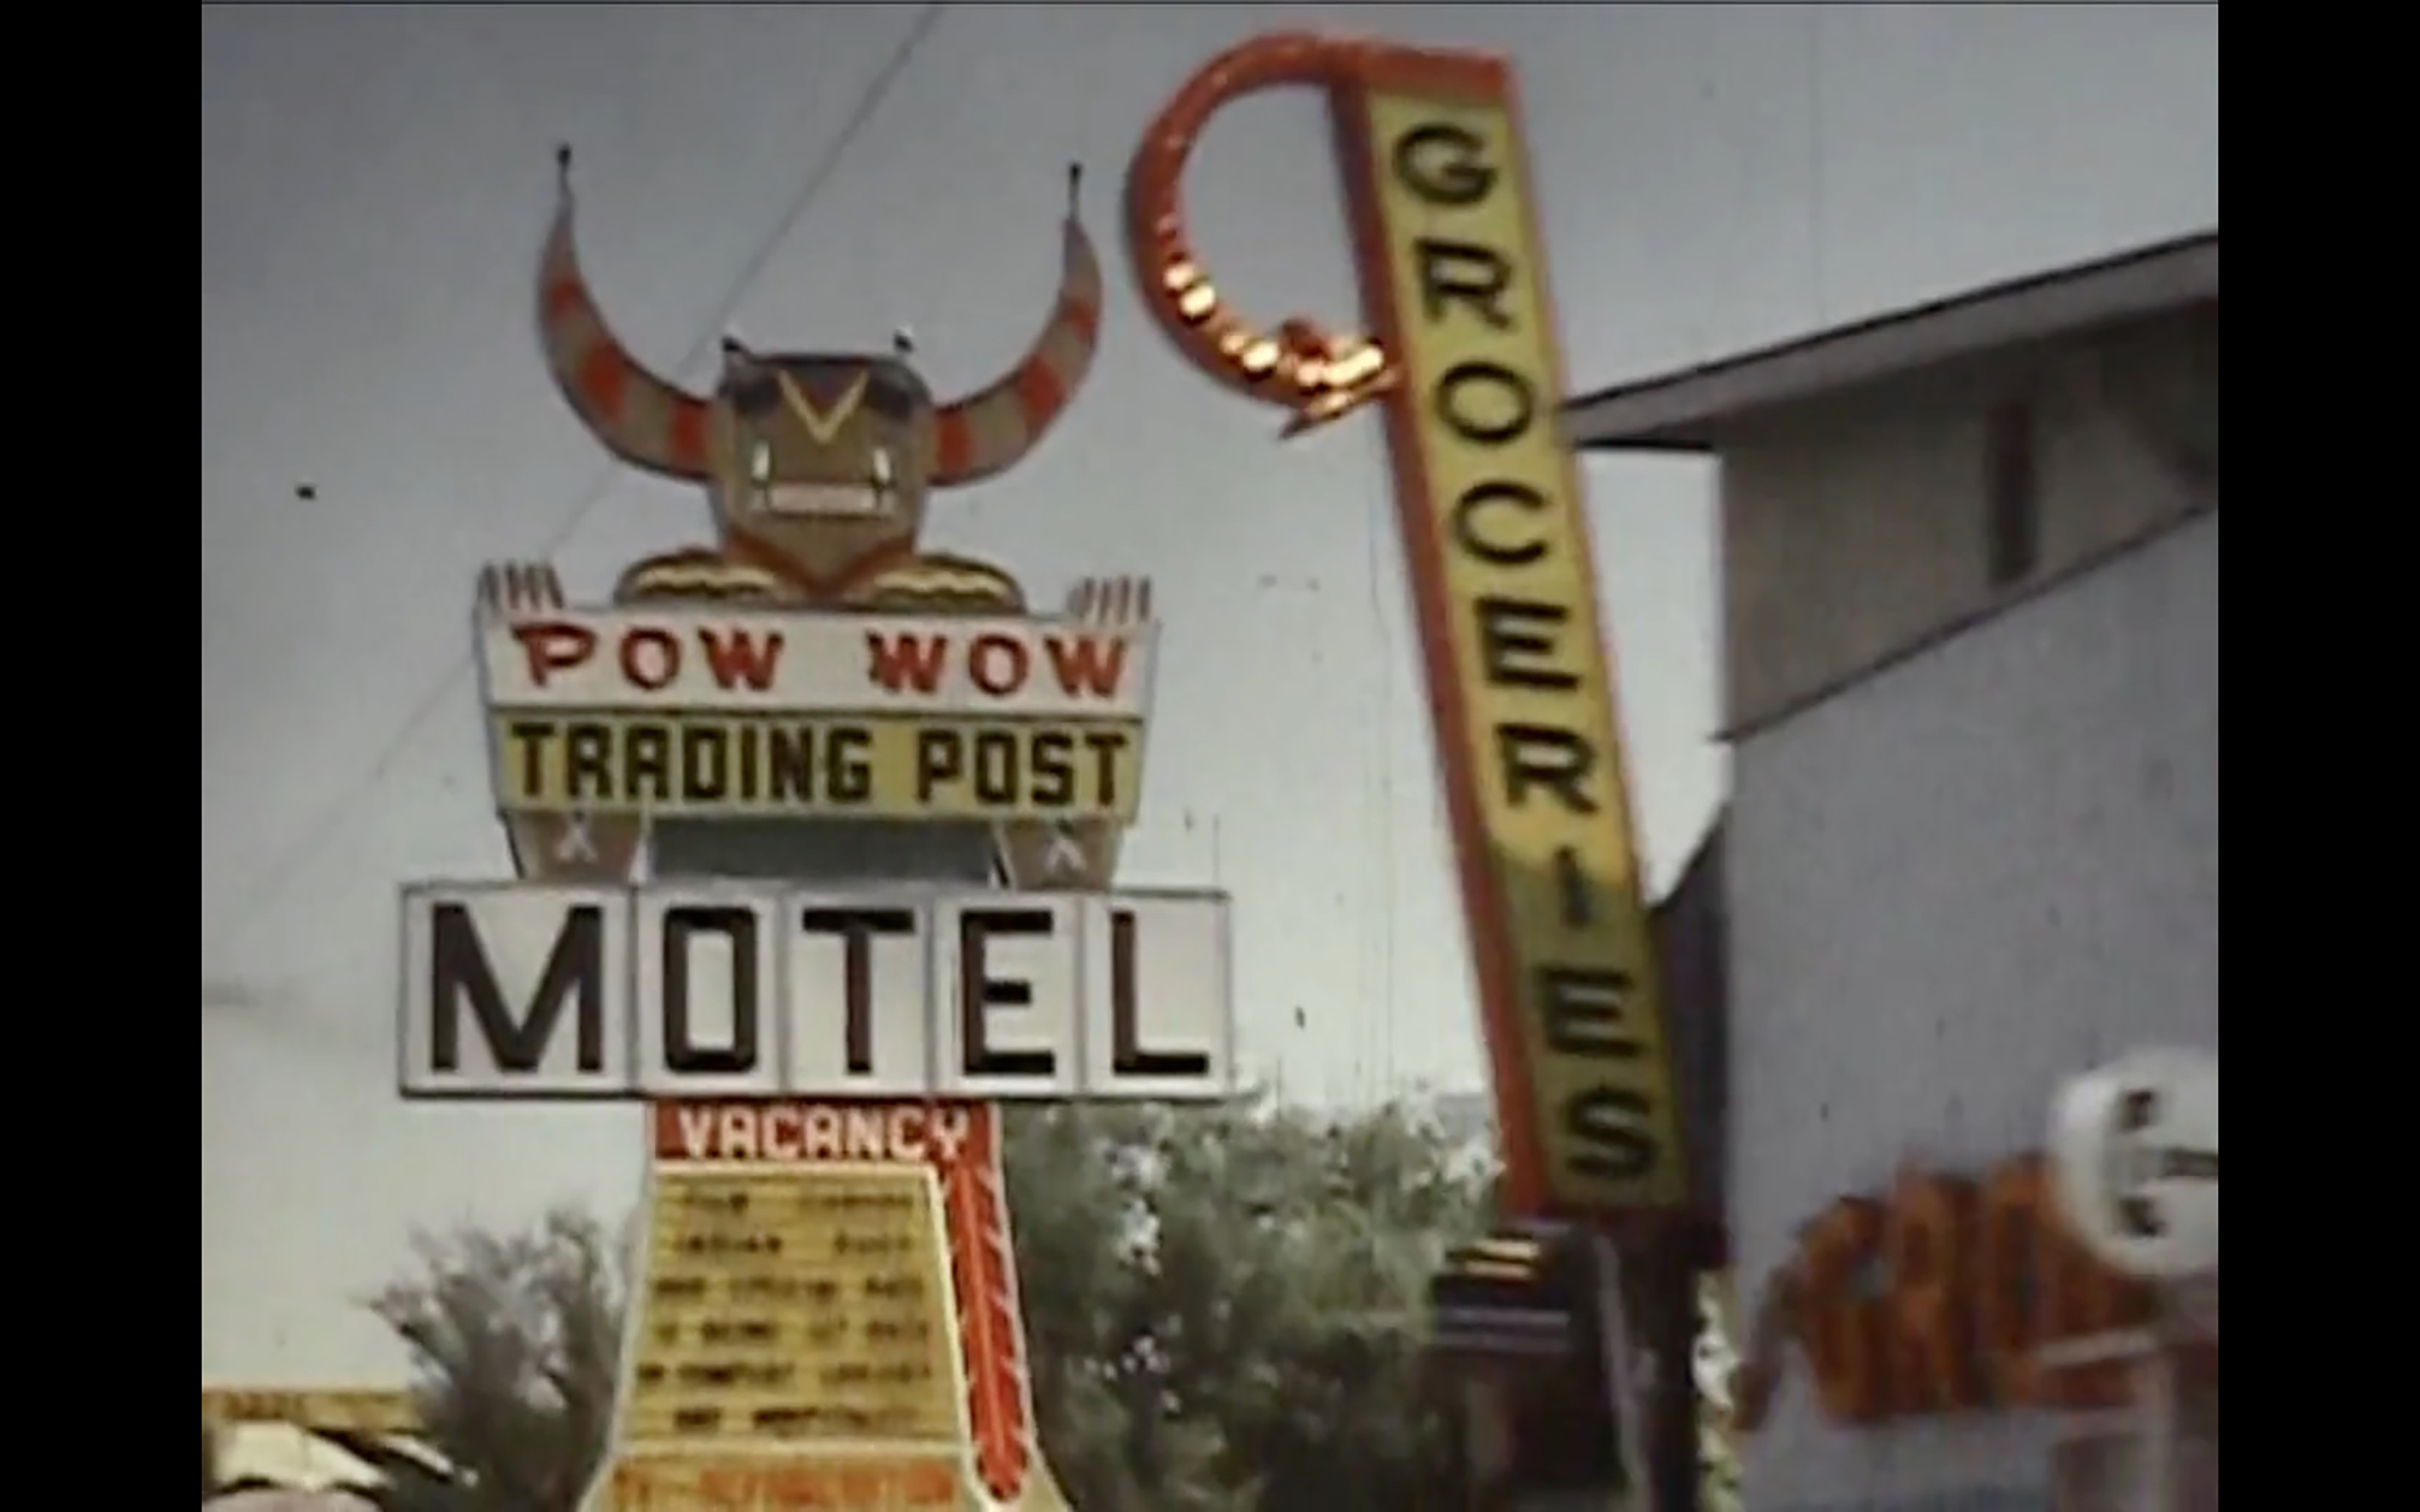 A still from the film "Class Order Family Tribe" by Rob Fatal. The still features a wide shot of outdoor signage outside of a grocery stor. The still is from a film, and the signage in focus is of a particularly old aesthetic. The leftside of the image features a sign that advertises a "Pow wow trading post" motel. A cartoon figure of a native person with horns holds up the sign for the trading post.